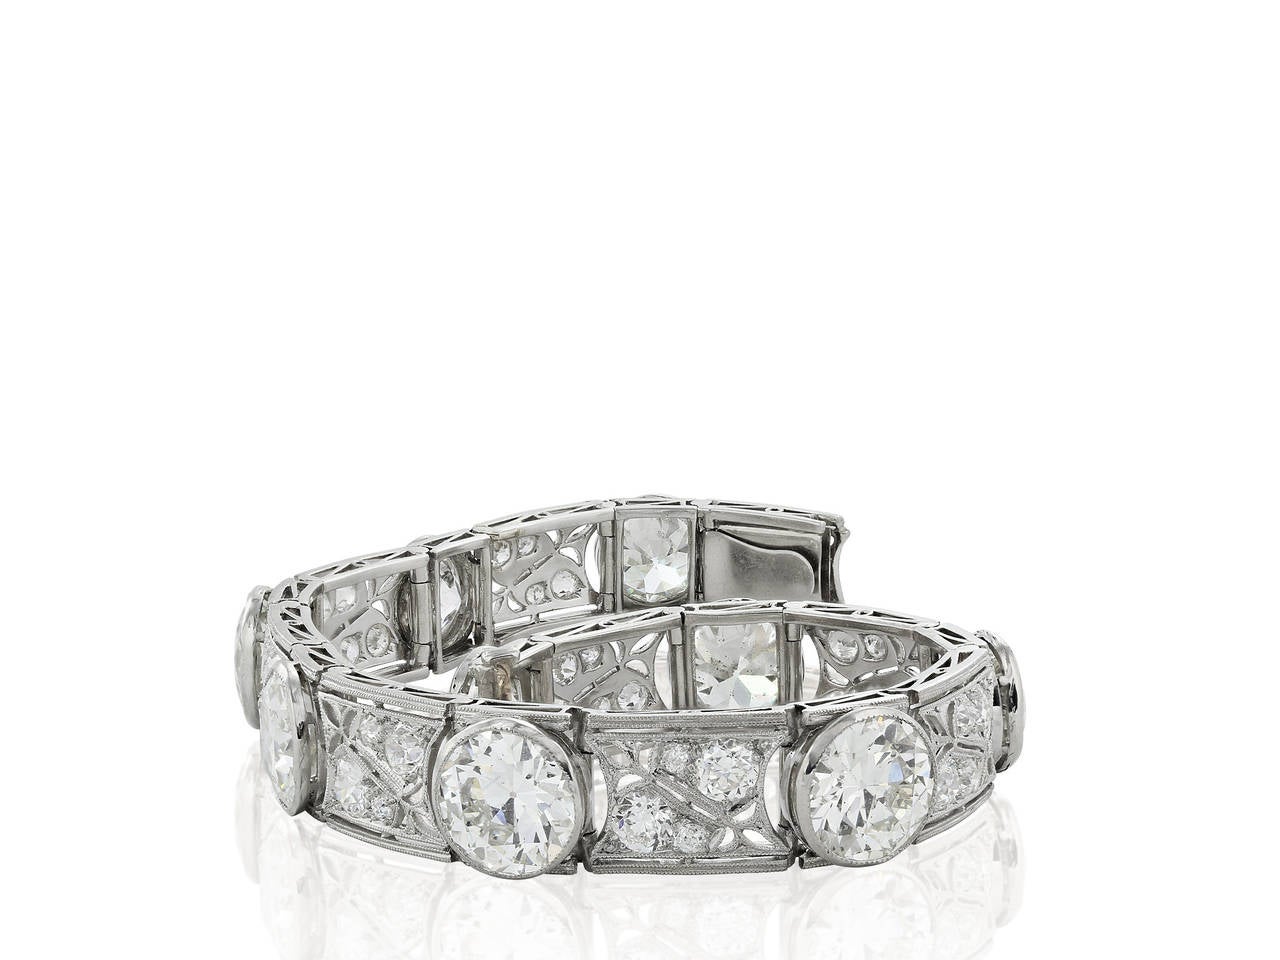 Edwardian 28.50 Carats Diamonds Platinum Bracelet In Excellent Condition For Sale In Chestnut Hill, MA